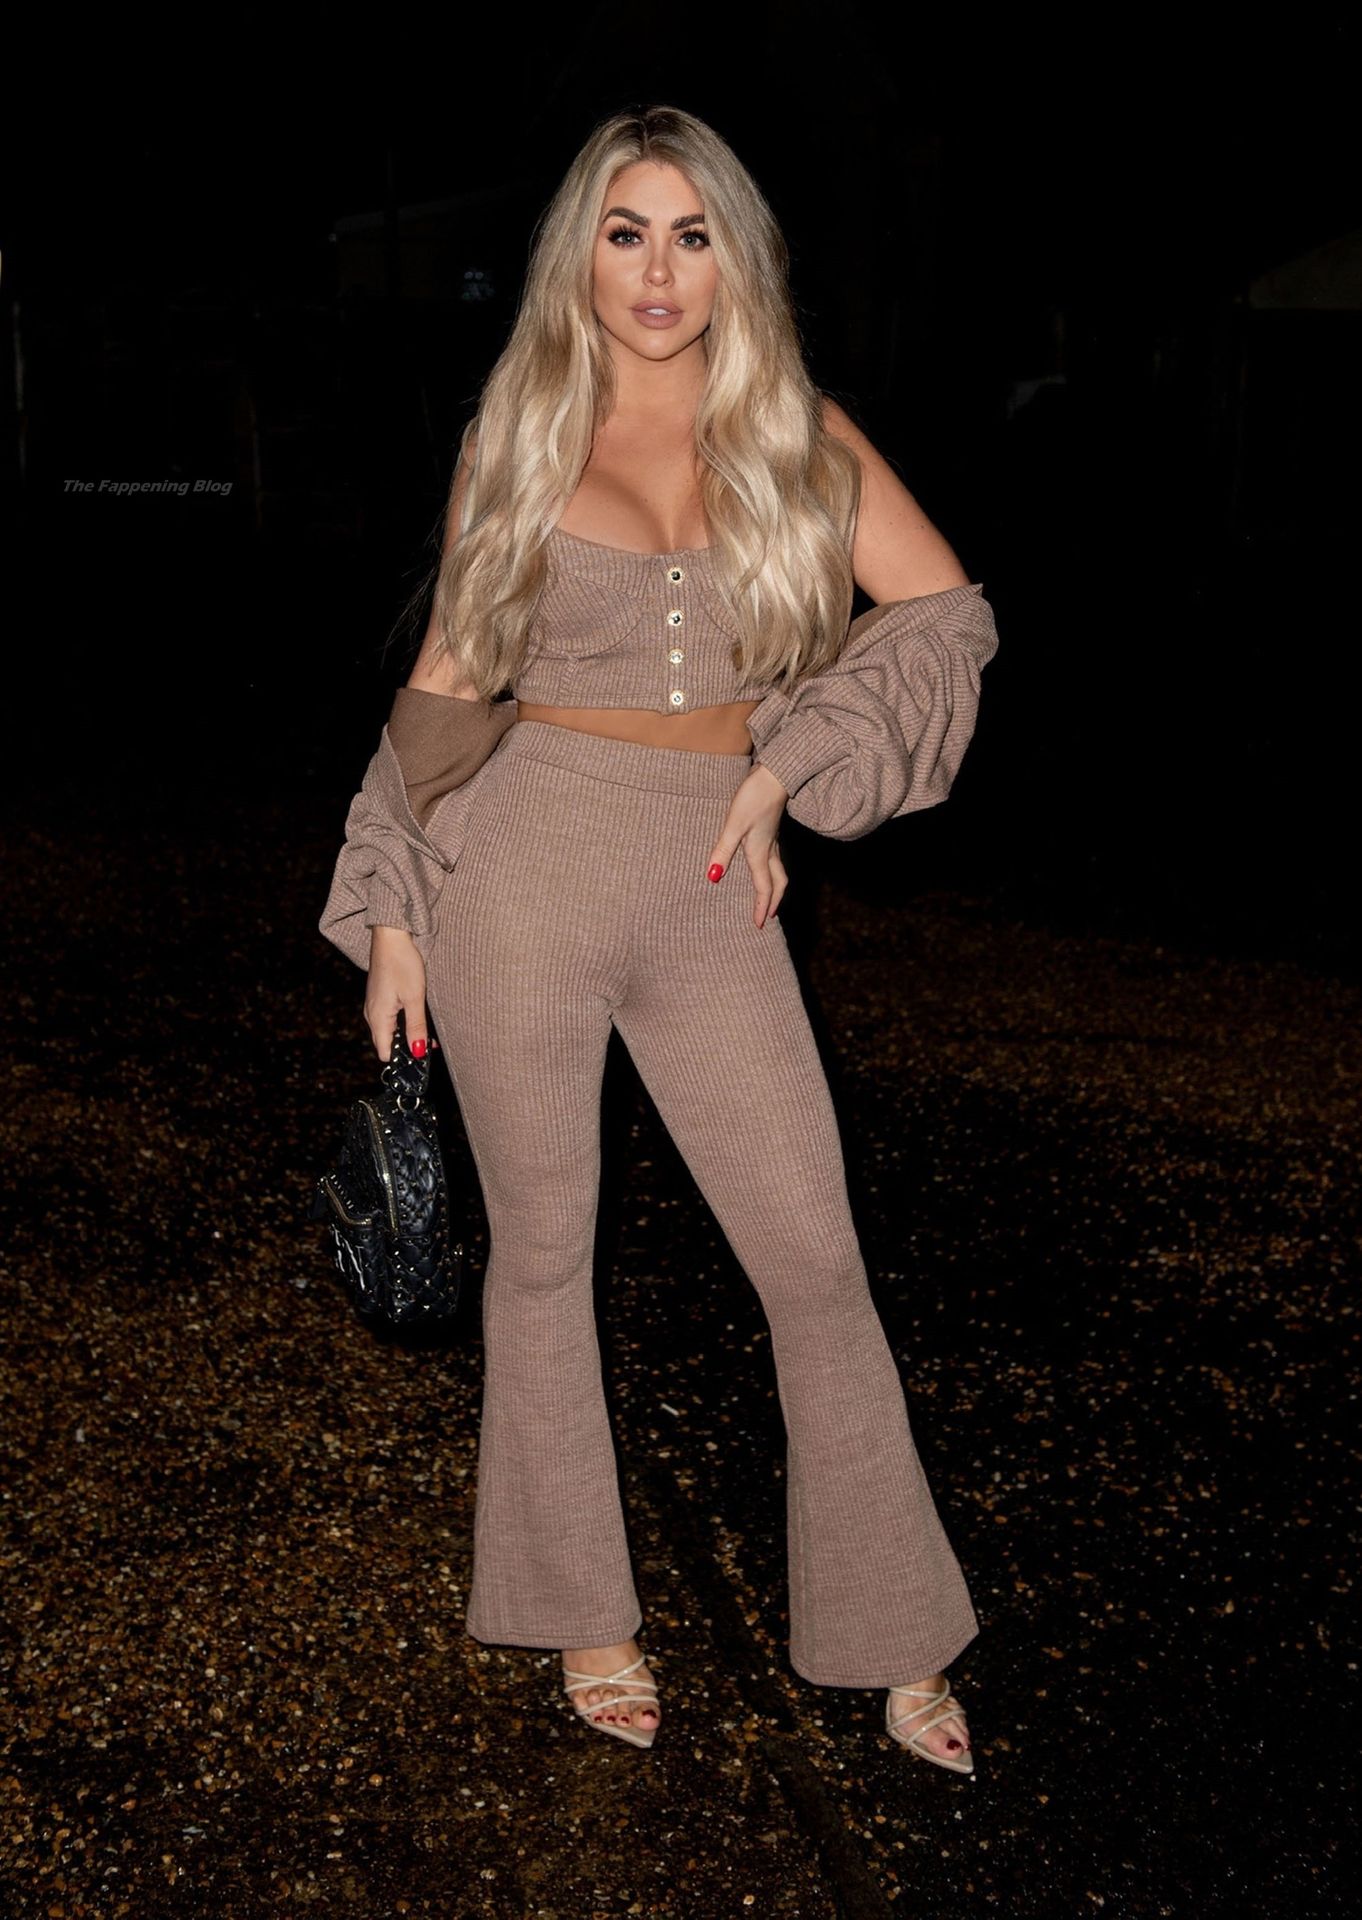 Bianca Gascoigne is Seen Leaving a Studio After a Photoshoot in London (13 Photos)